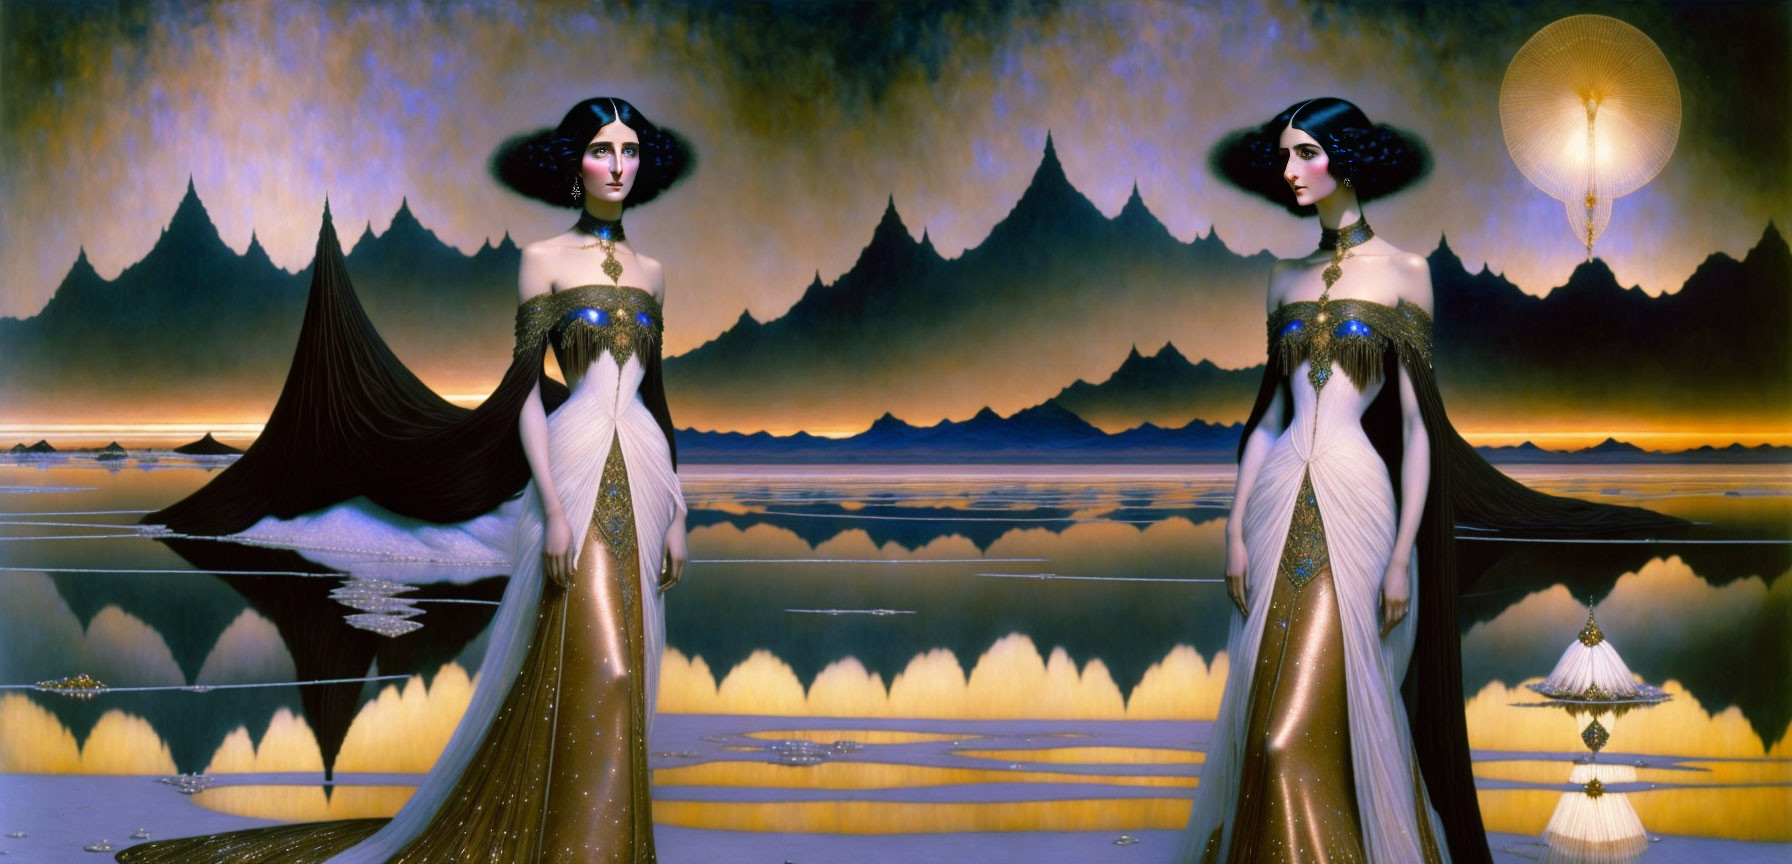 Symmetrical fantastical painting of two women in elegant gowns with surreal background.